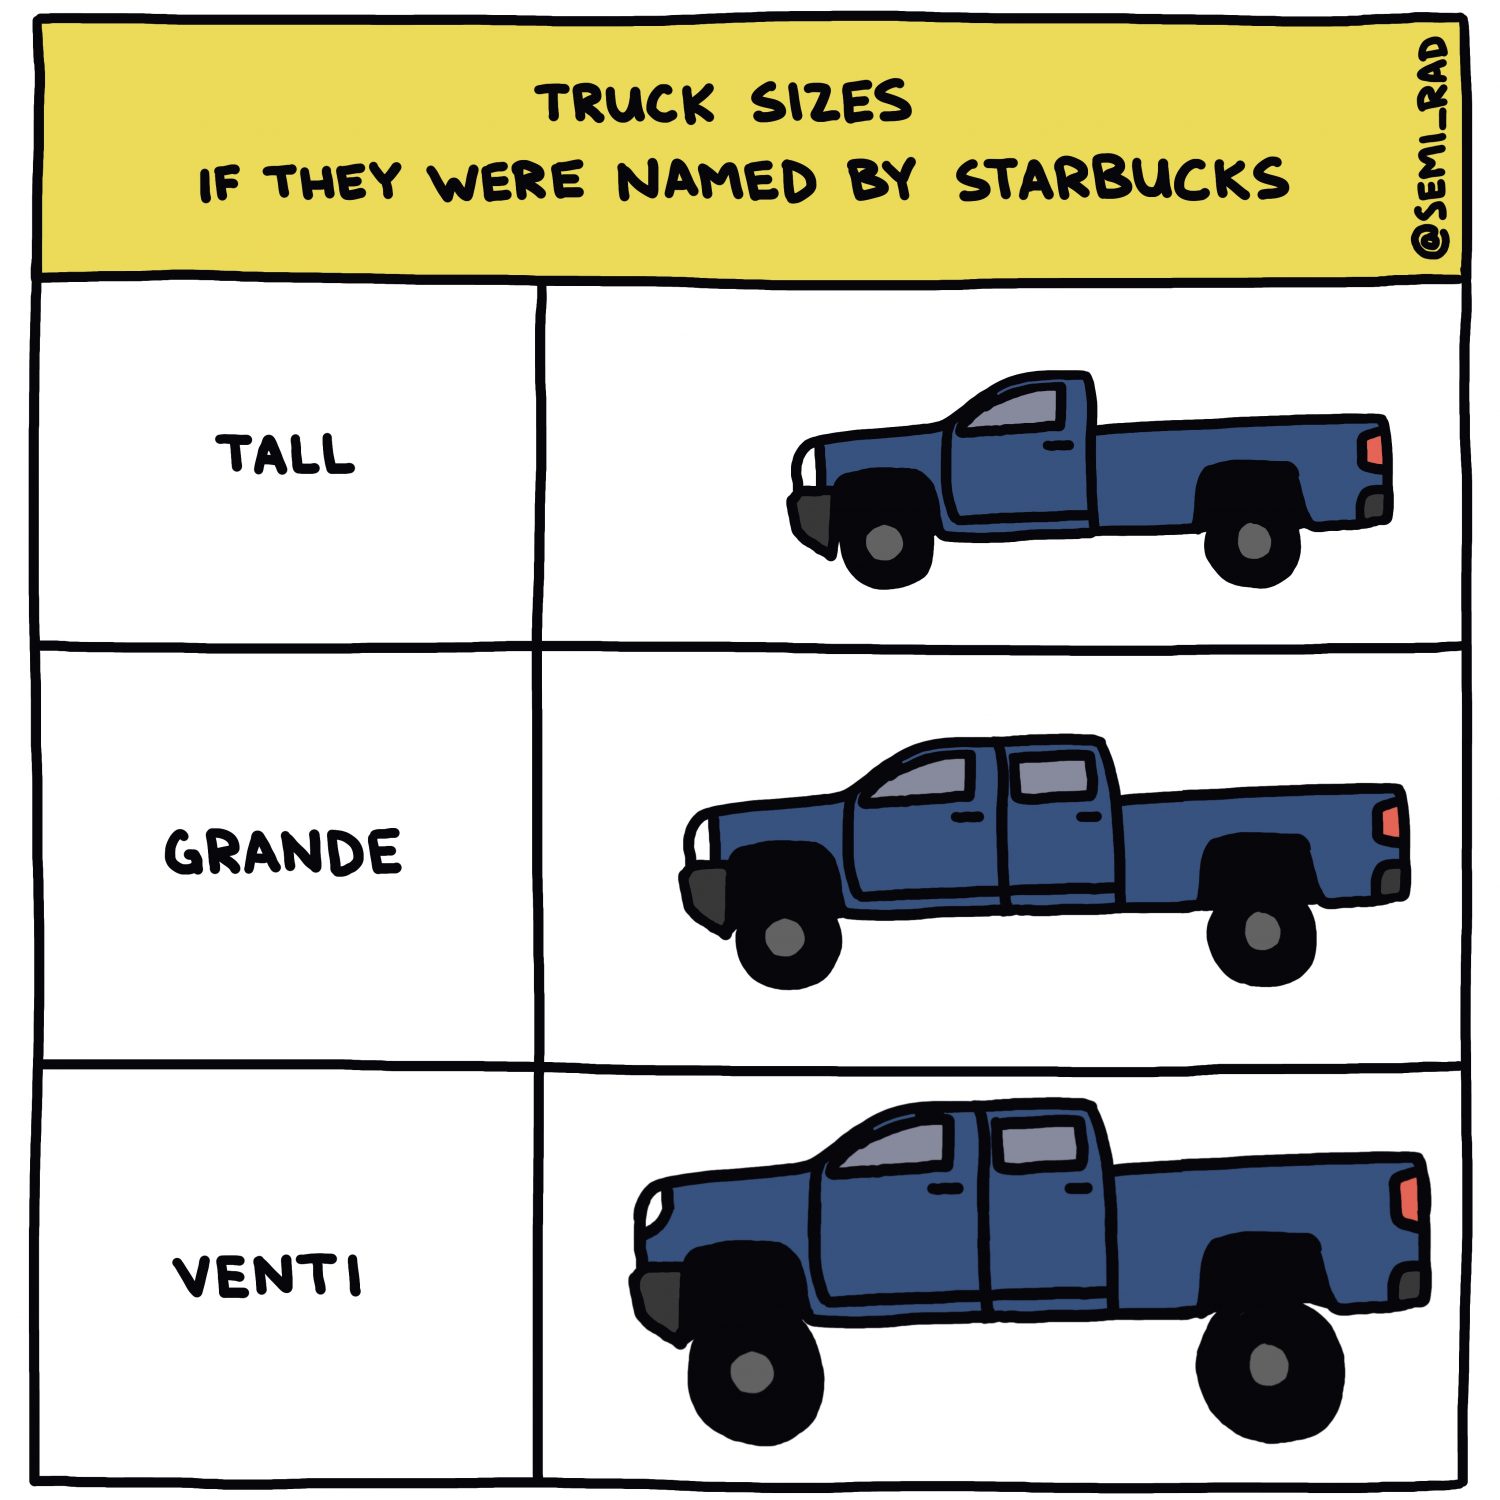 Truck Sizes, If They Were Named By Starbucks